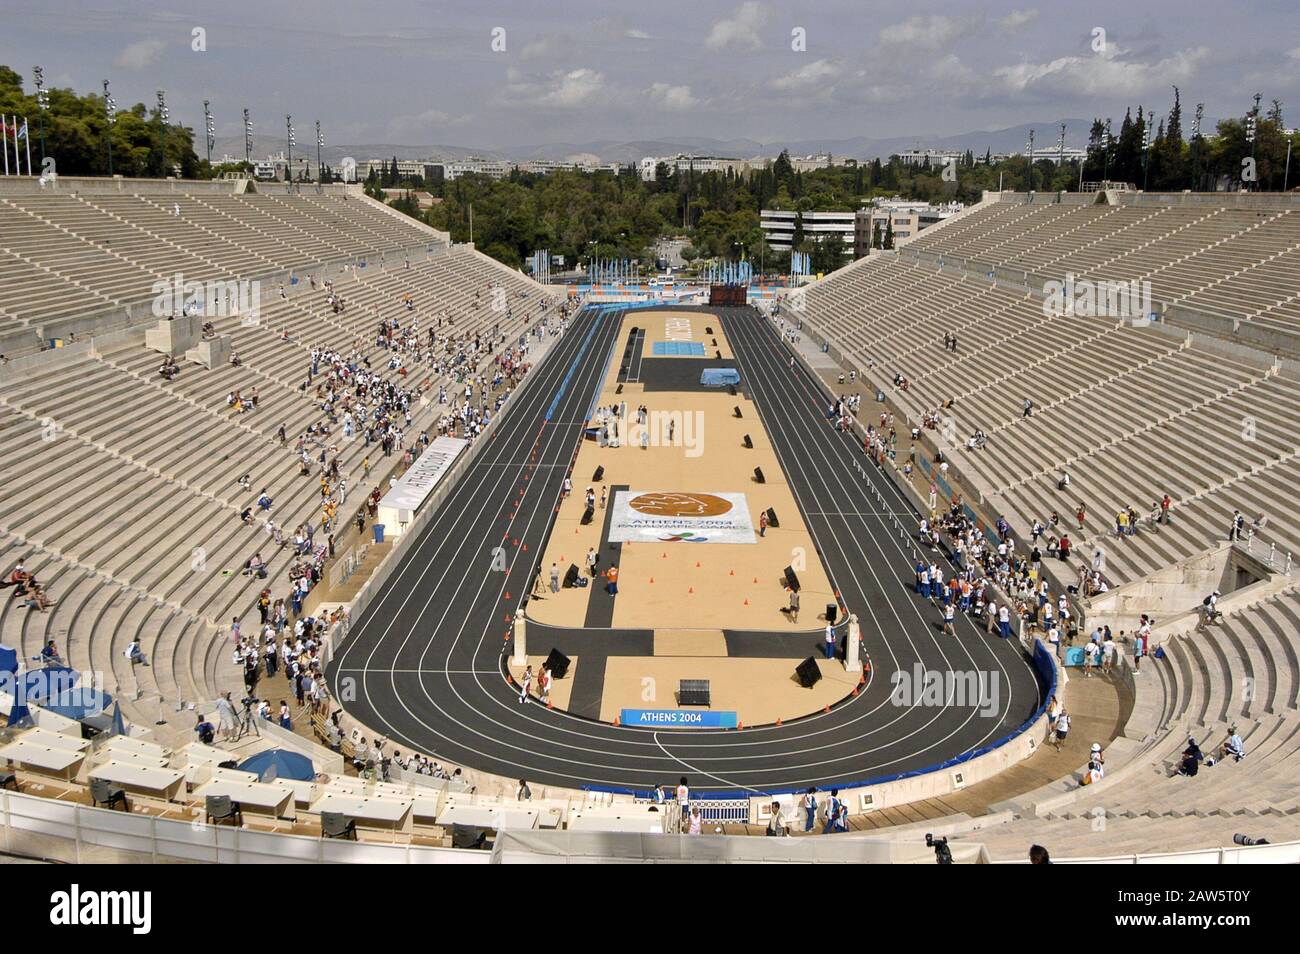 Panathenaic Stadium (Panathinaiko Stadio), first used as a stadium in 330-329 BC, site of the first modern Olympic Games in 1896. Stock Photo